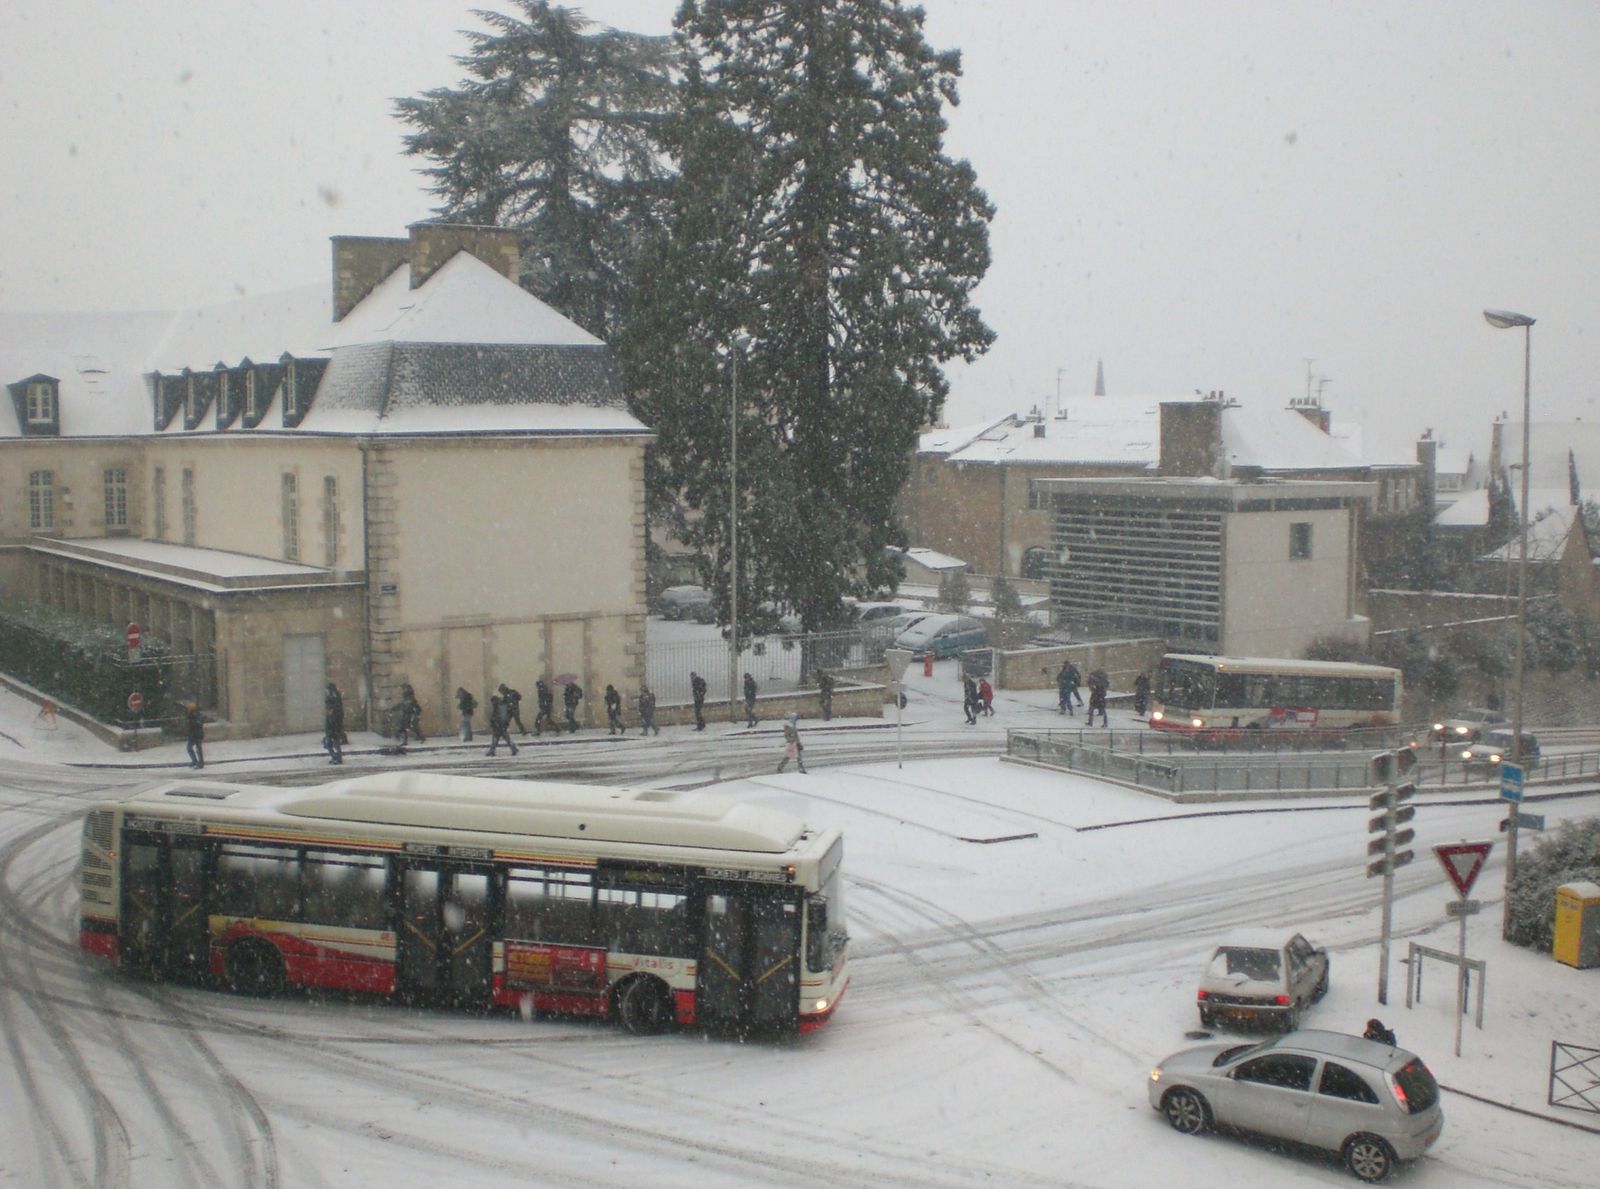 Bus-neige-rond-point-PdM.JPG